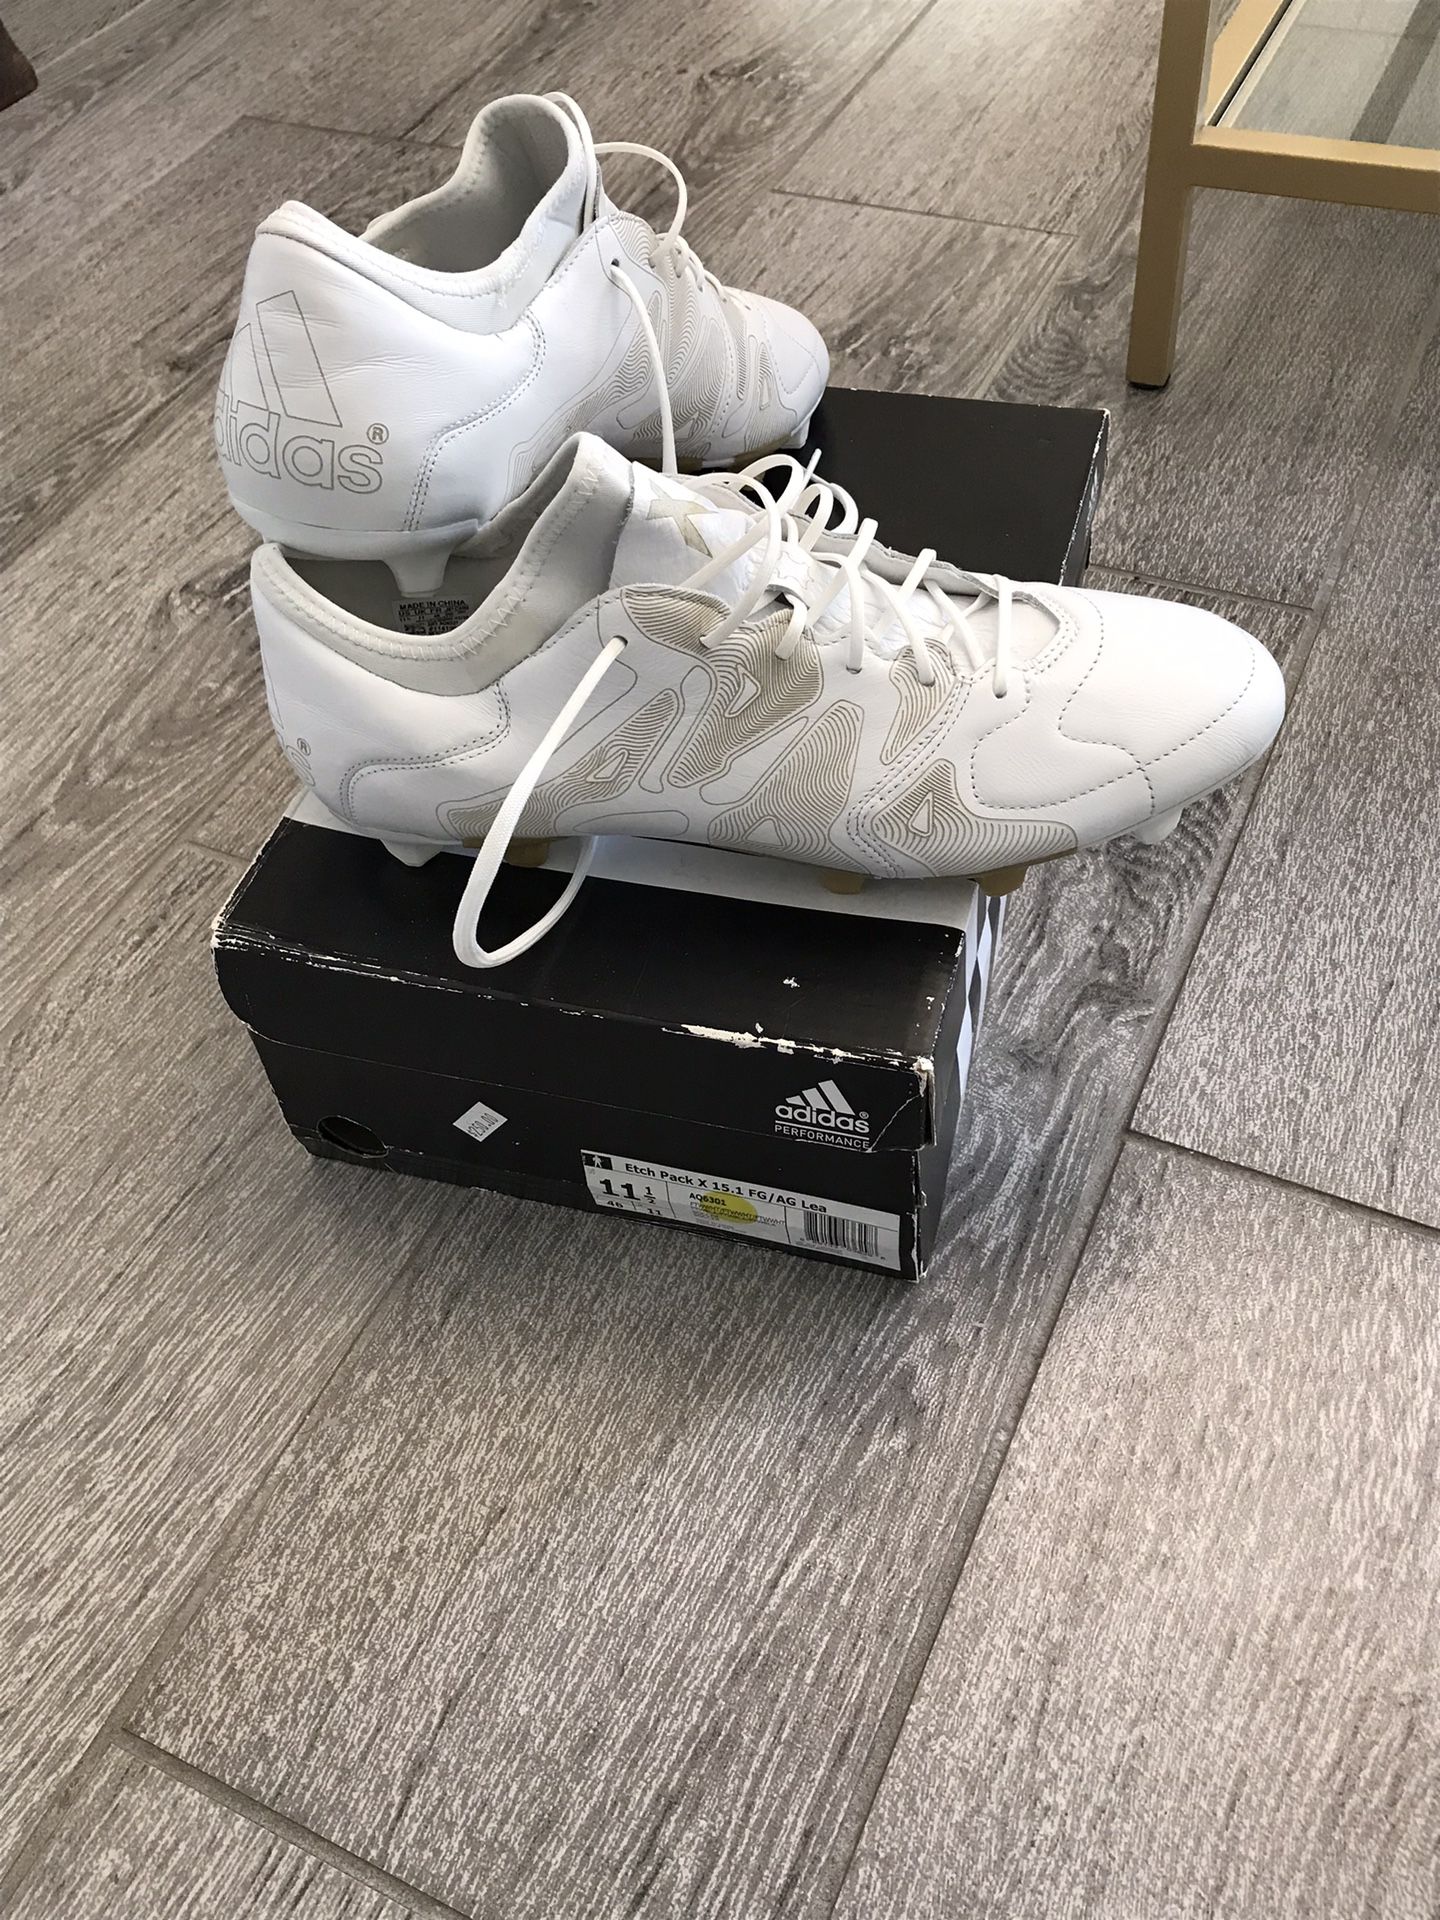 typisk tidsplan kiwi New Adidas Soccer Cleats Adidas Etch Pack Size 11.5 Kangaroo Leather for  Sale in Dallas, TX - OfferUp